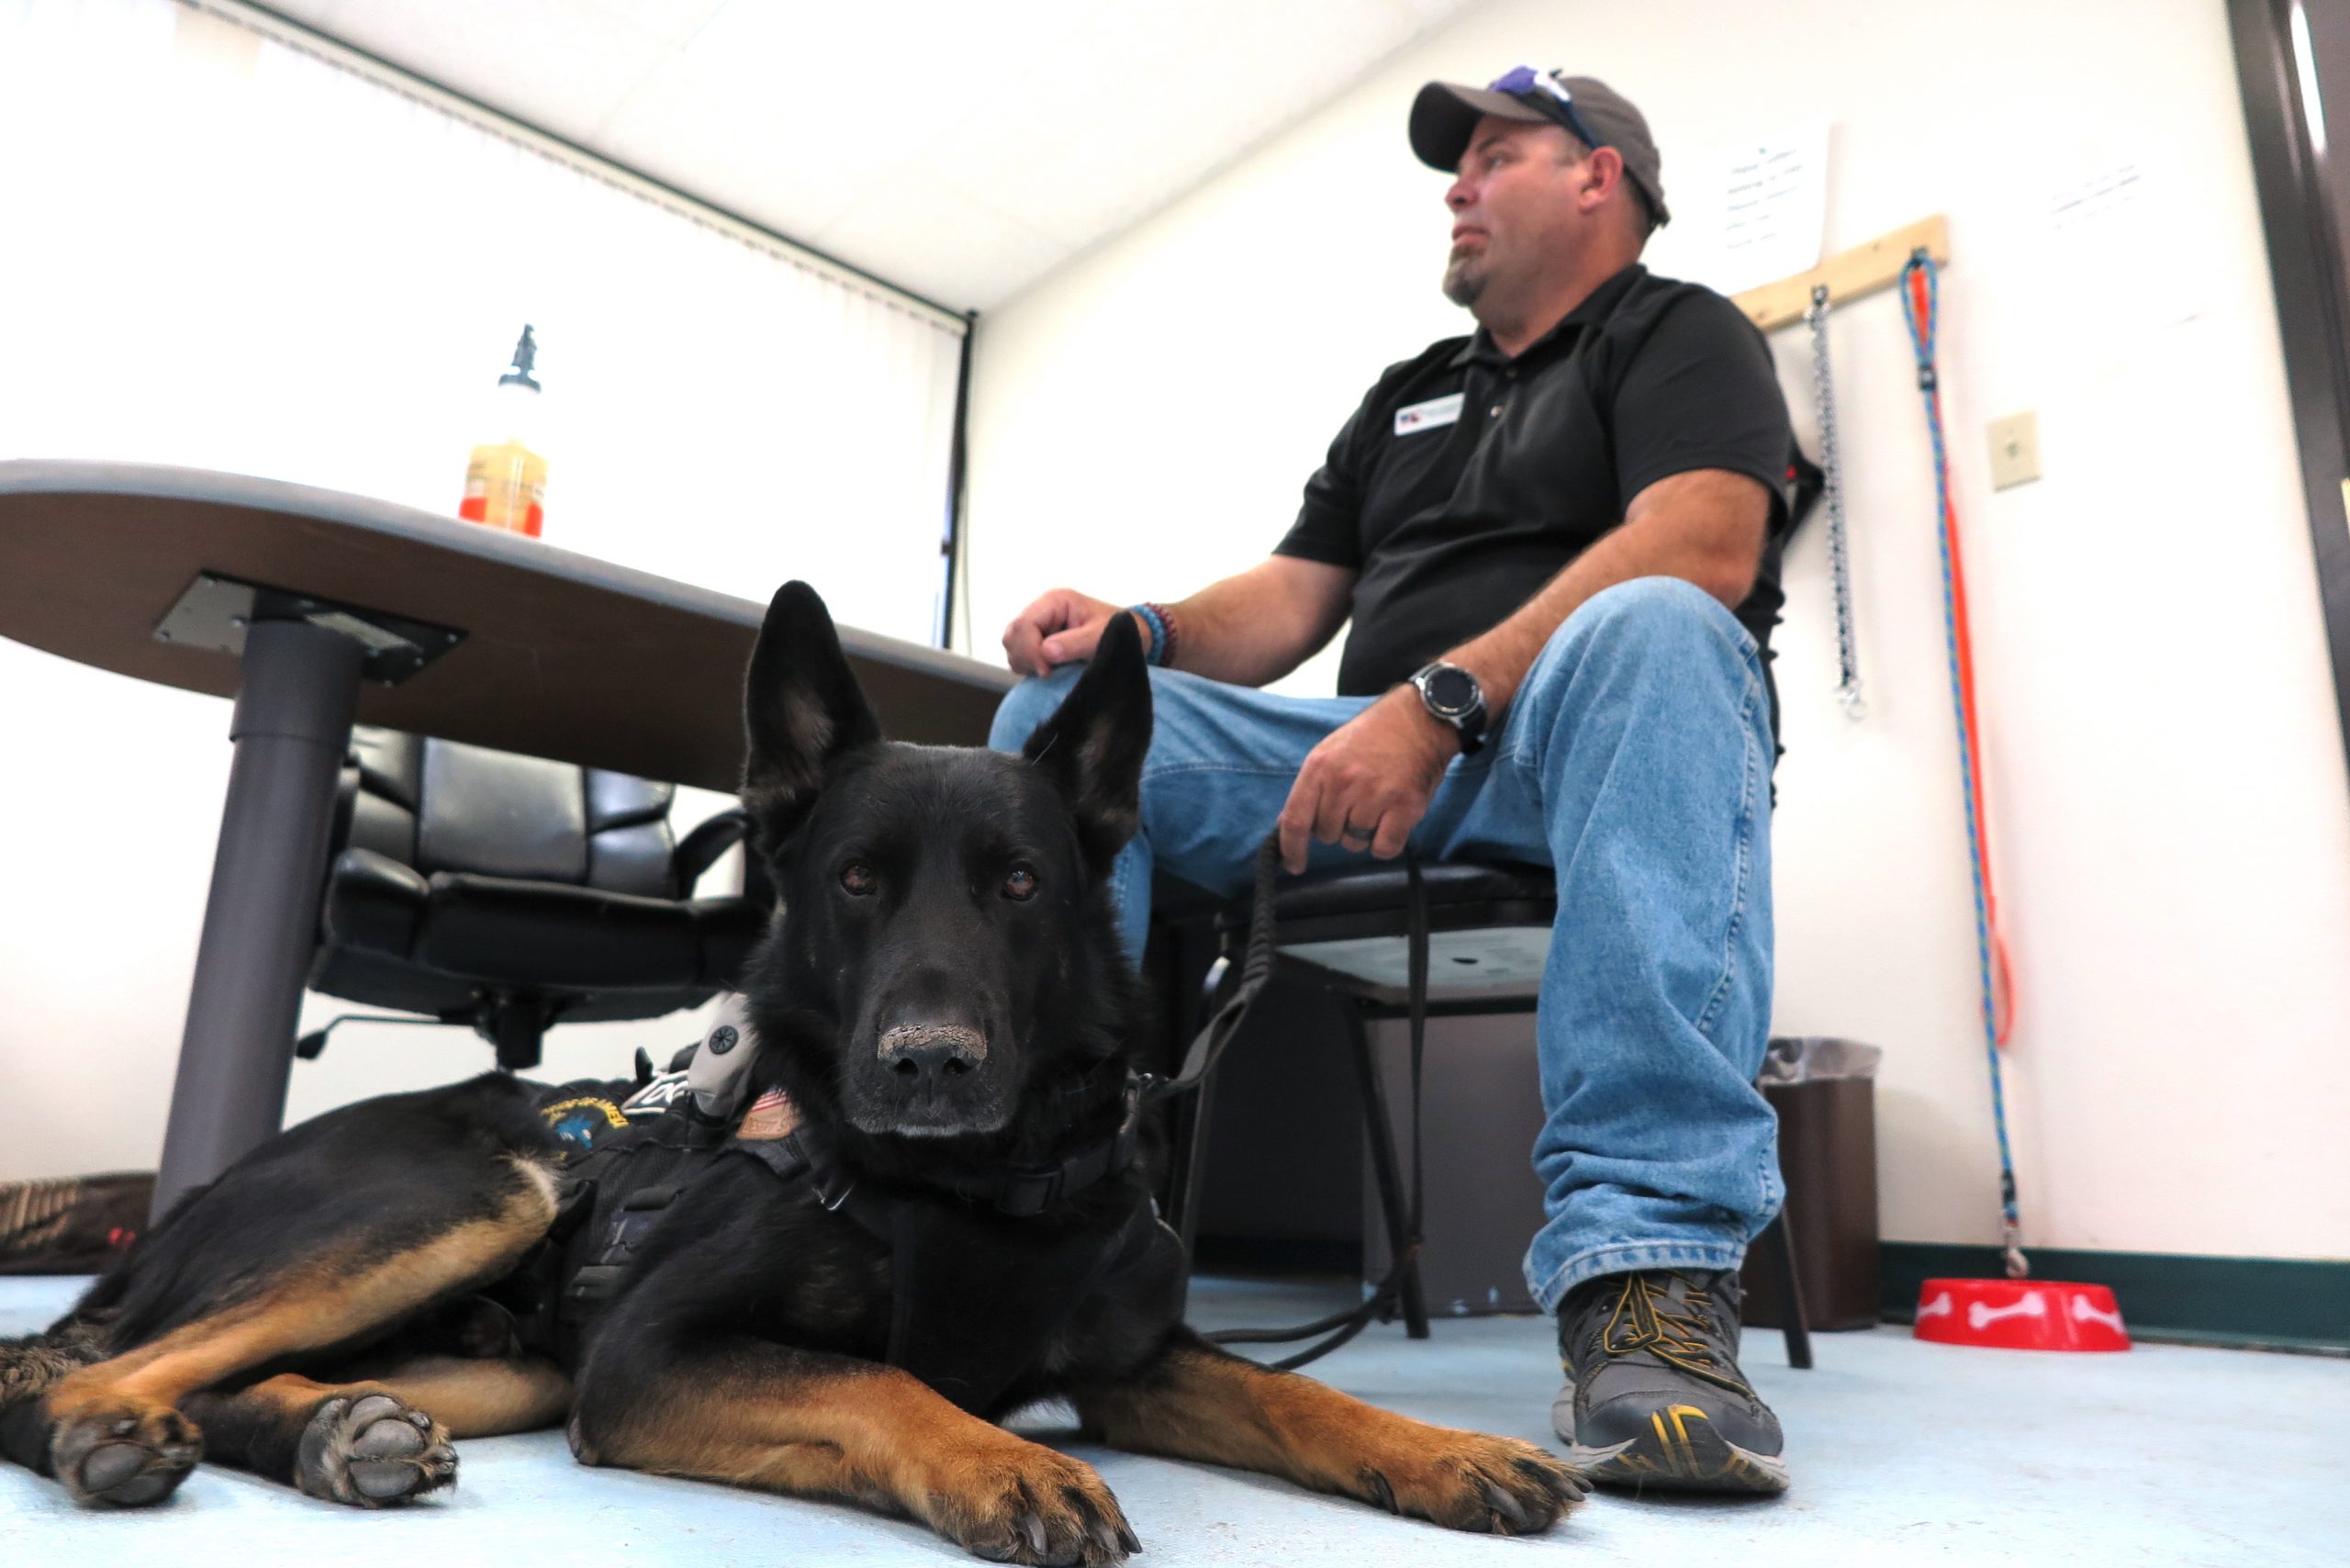 How To Get A Service Dog For Ptsd From The Va